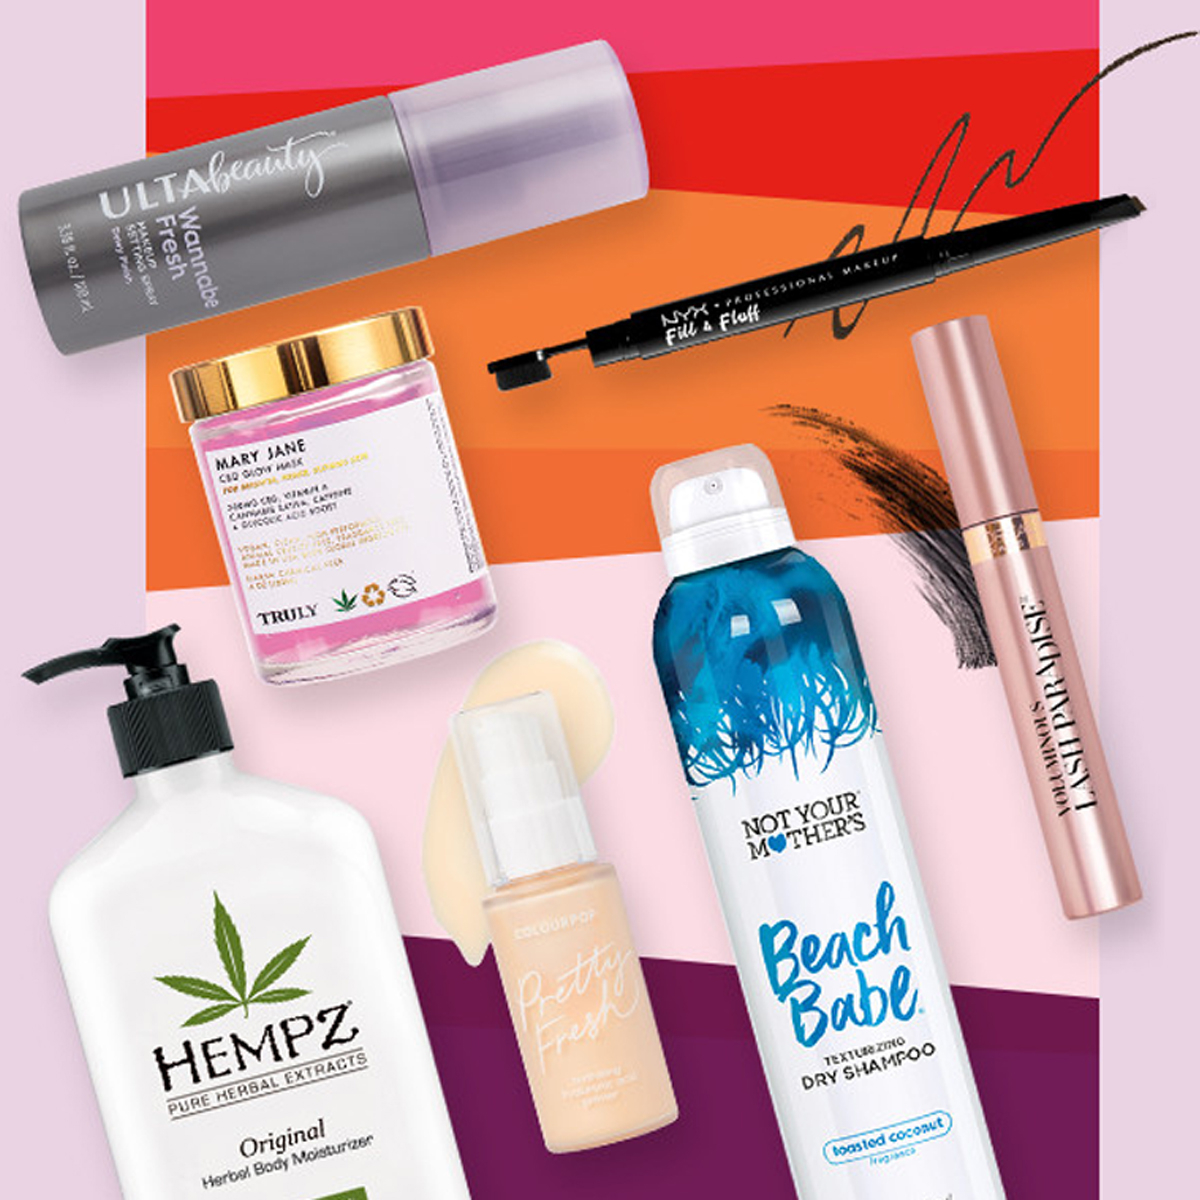 Score up To 50% off at Ulta's Fall Haul Sale